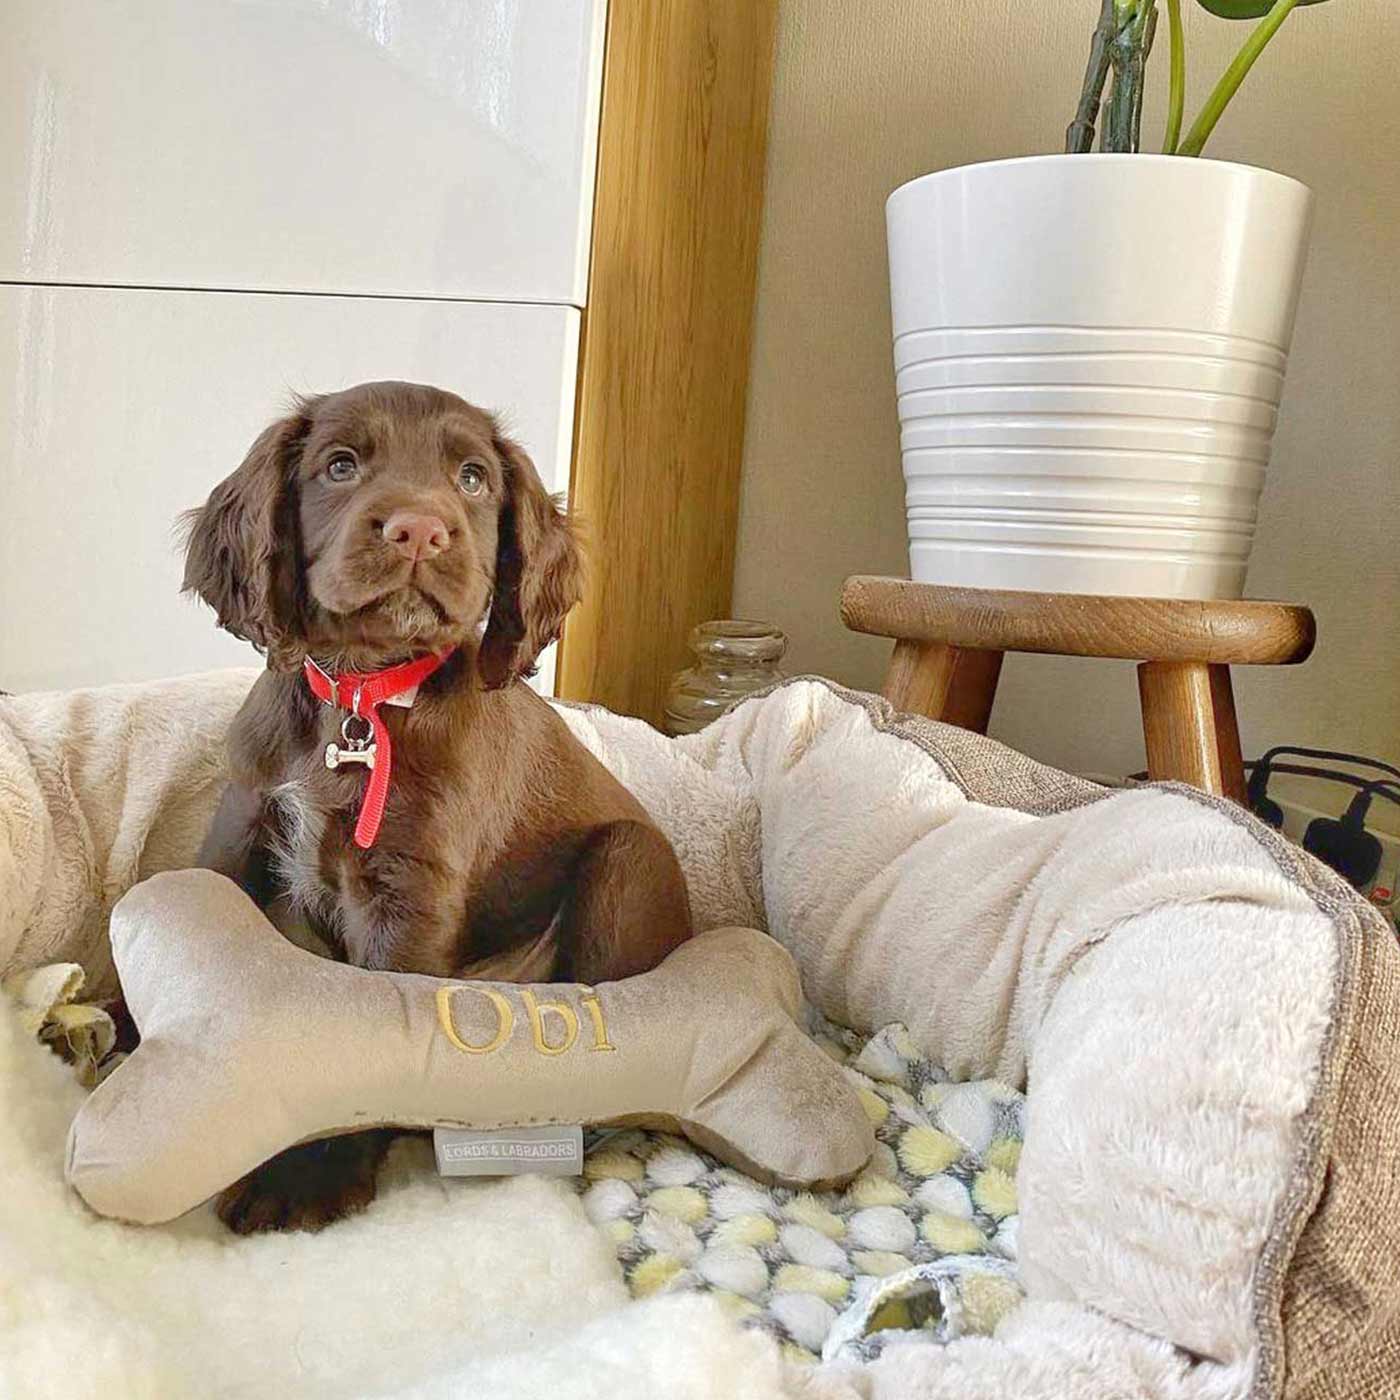 Discover The Perfect Bone For Dogs, Luxury Dog Bone Toy In Mushroom Velvet, Available To Personalize Now at Lords & Labradors US